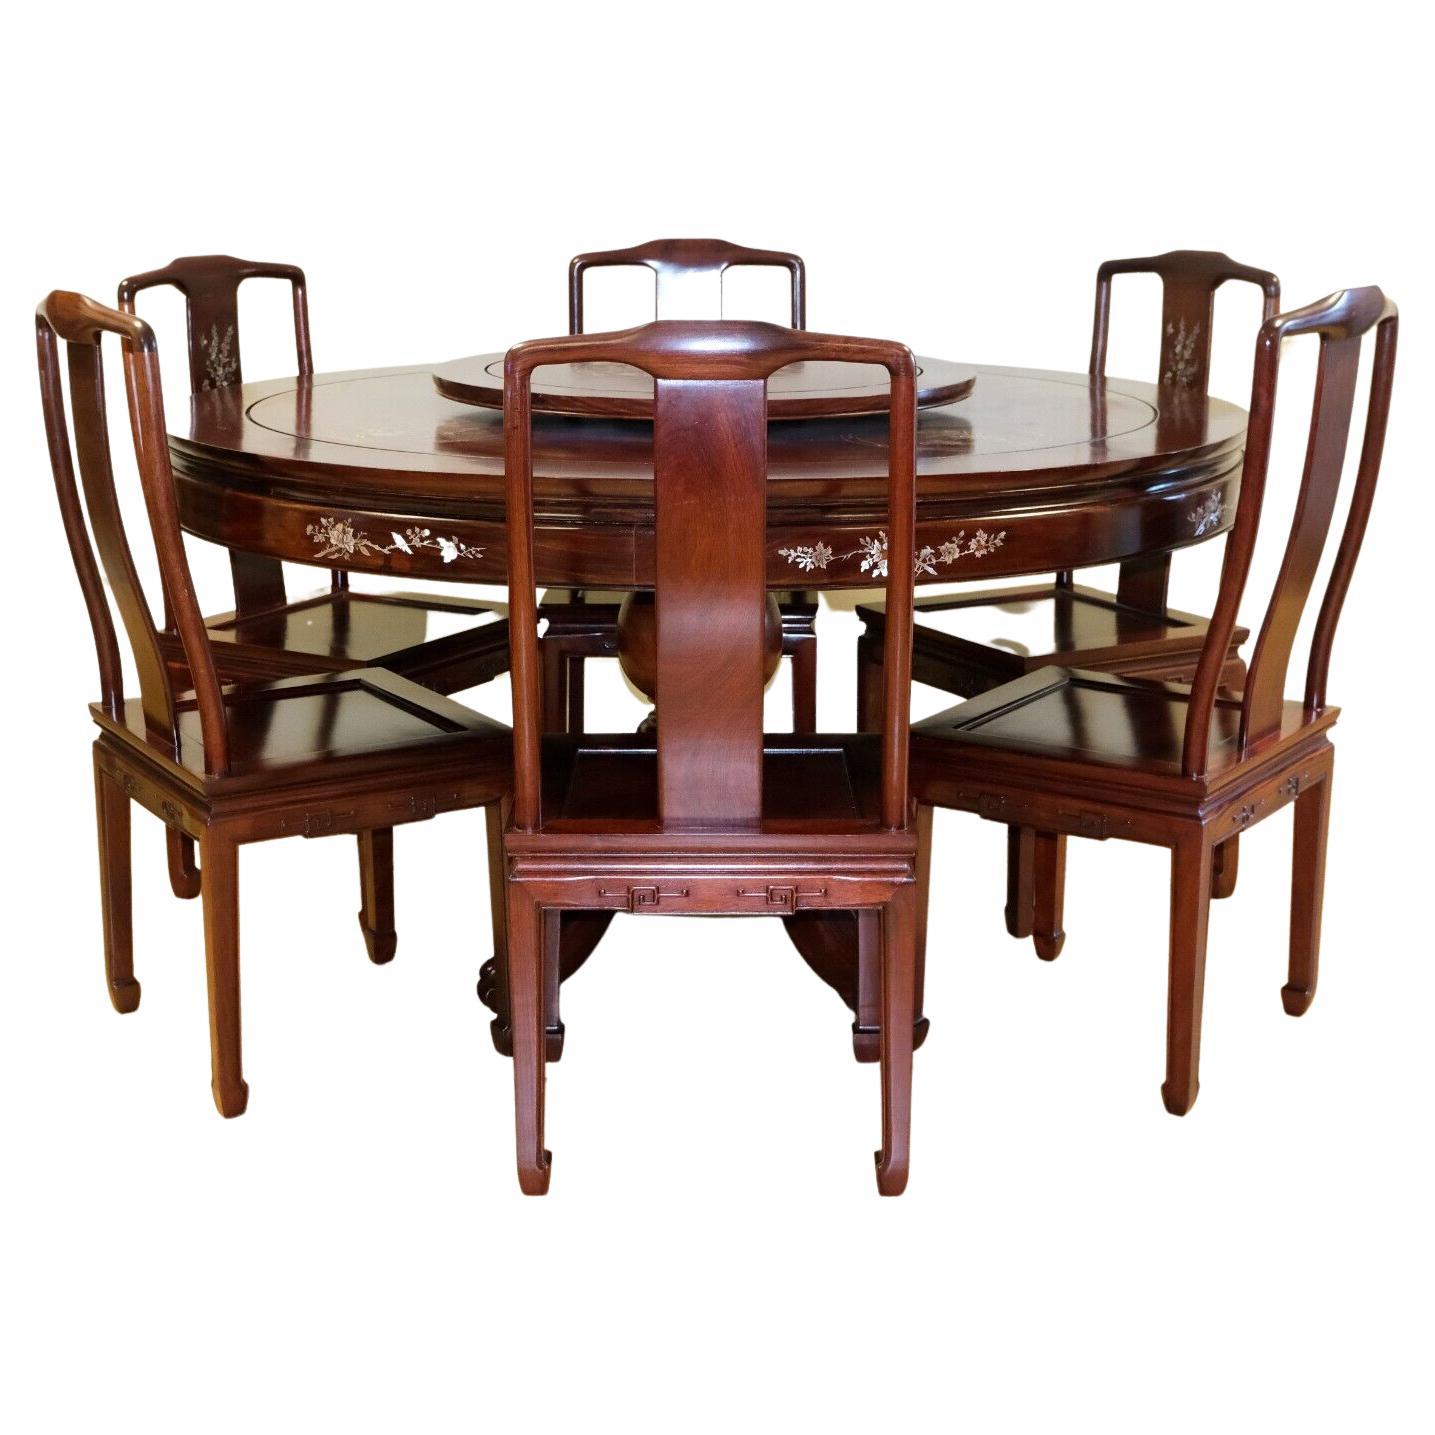 We are delighted to offer for sale this stunning rosewood Chinese round dining table with six chairs and lazy Susan. 

This exquisite and delightful set offers you a good sized table, lazy Susan and six dining chairs. For start, the table (non